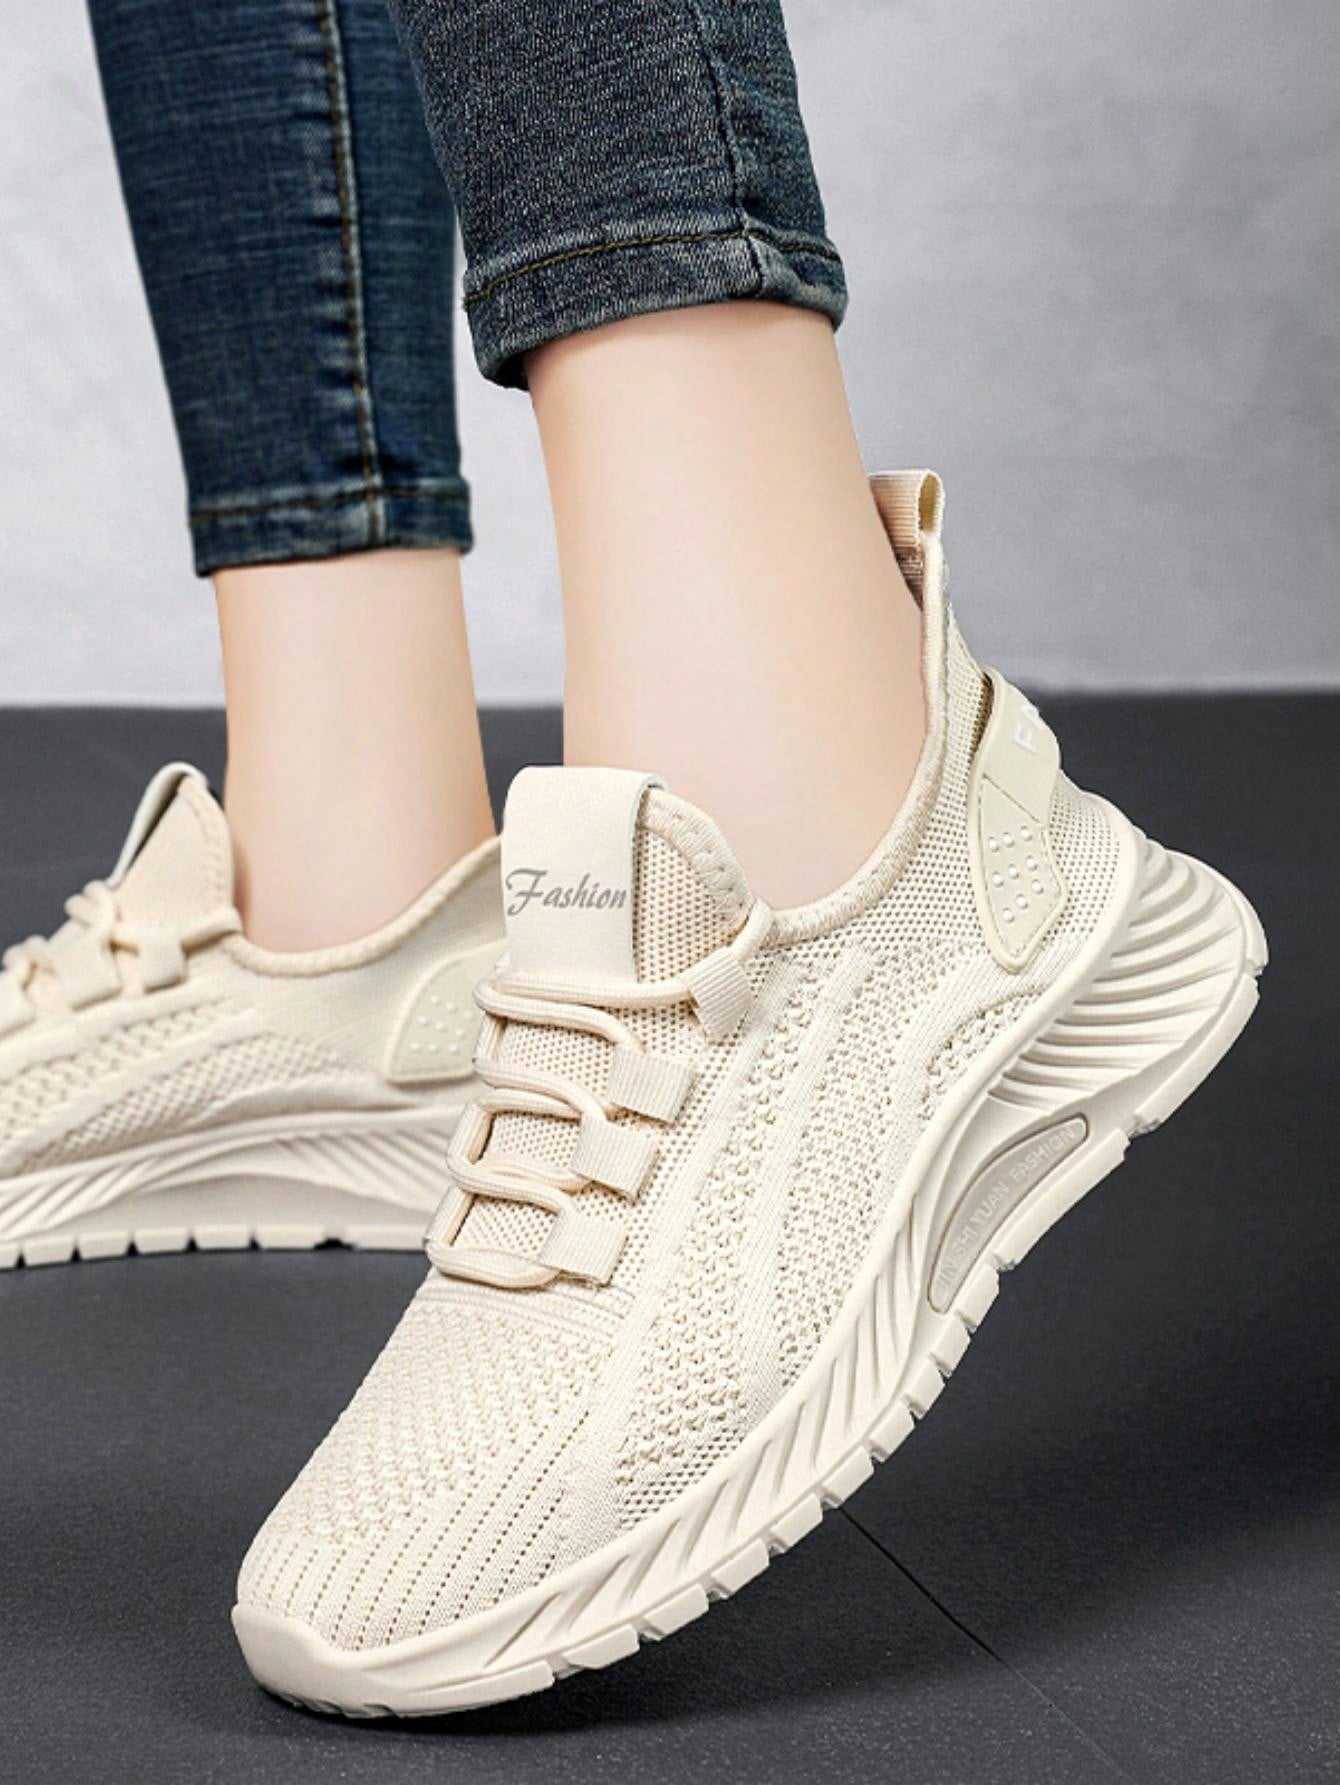 New Season Running Shoes For Women, Lightweight, Comfortable, Shock-Absorbing, Non-Slip, Breathable, Knitted, Casual Athletic Sneakers, Walking Shoes-Beige-6